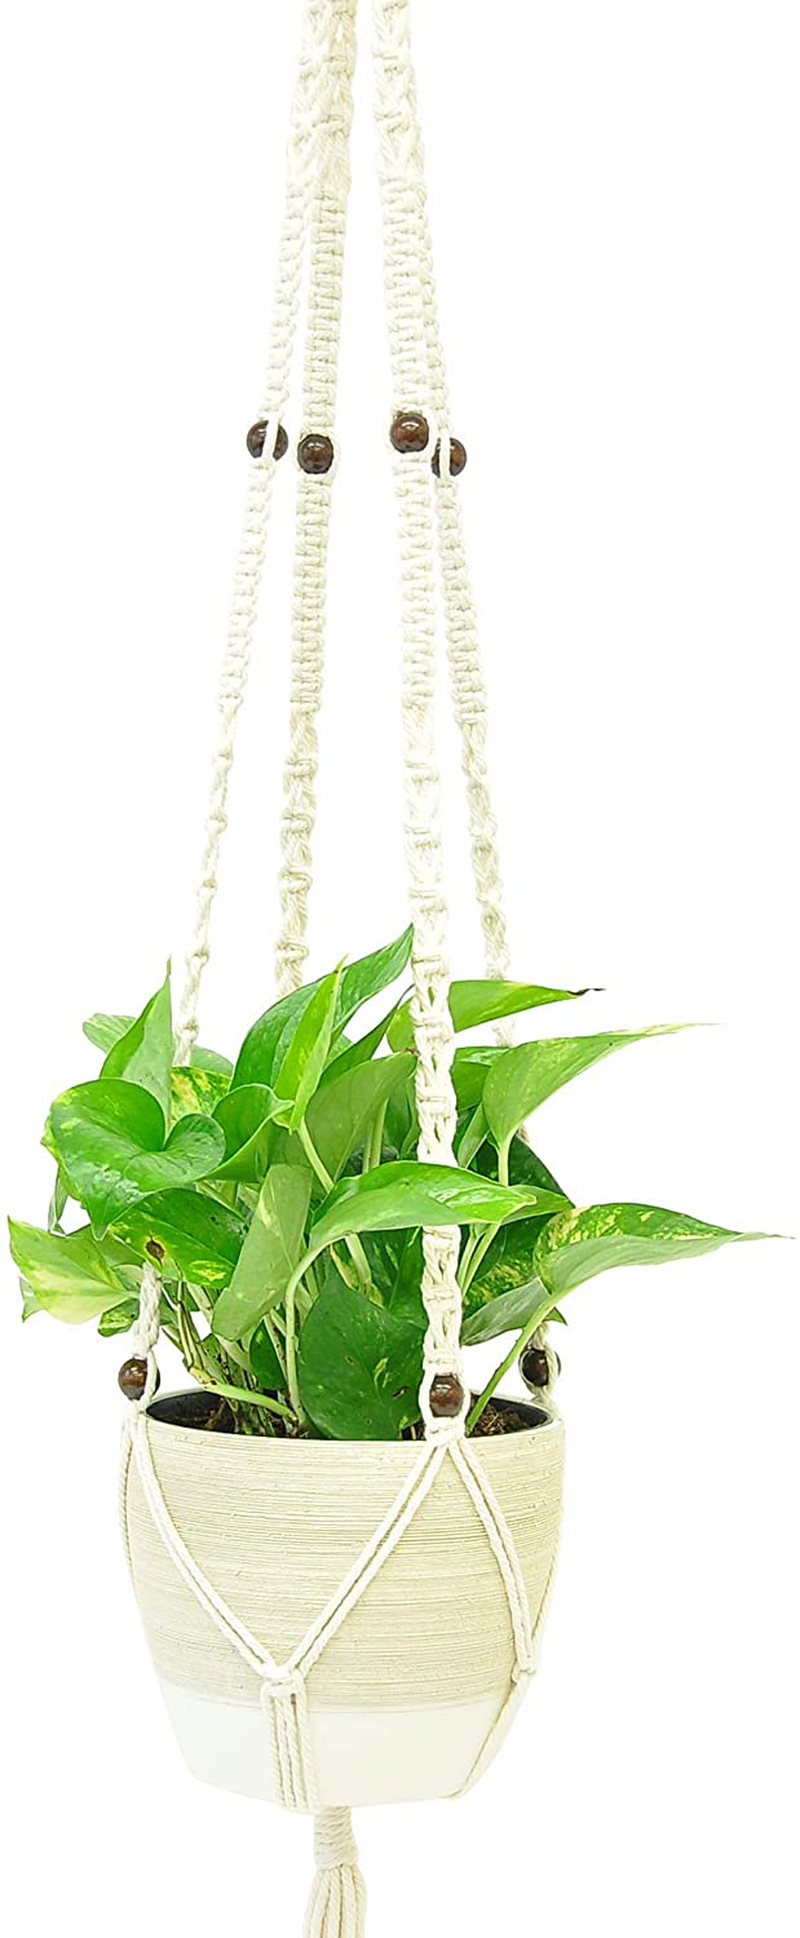 Costa Farms Devil'S Ivy Golden Pothos White-Natural Planter Live Indoor Plant, 10-Inches Tall, Fresh from Our Farm Room Decor